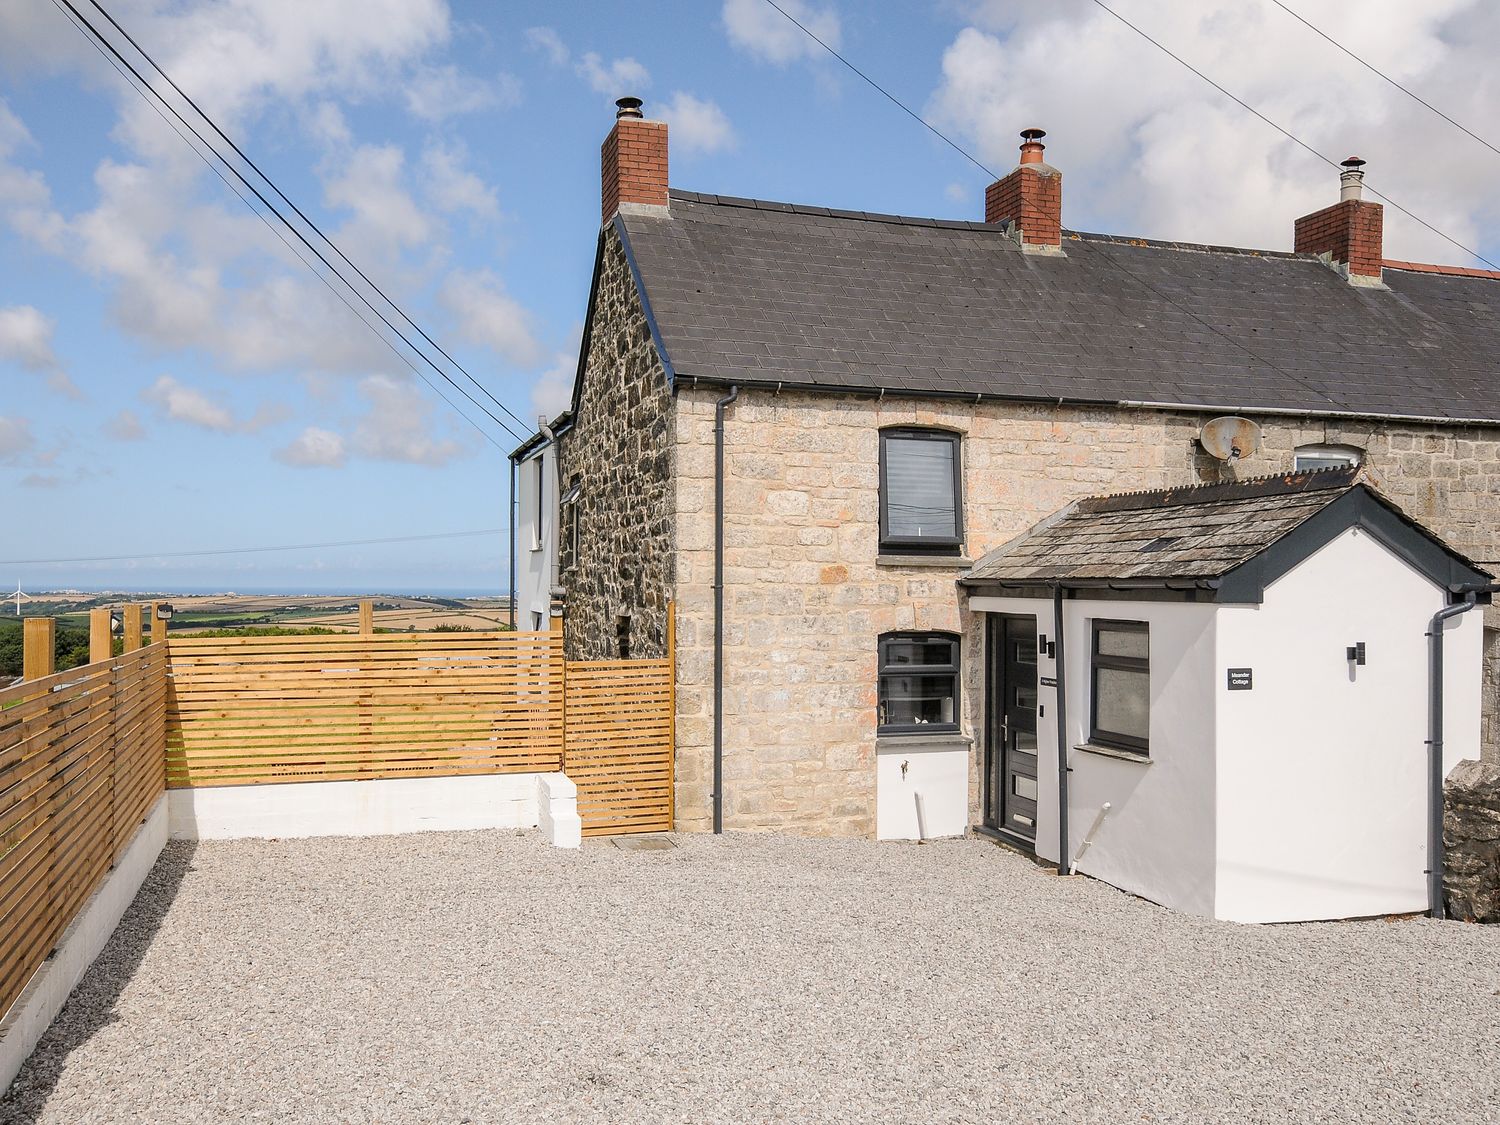 Meander Cottage - Cornwall - 1135320 - photo 1